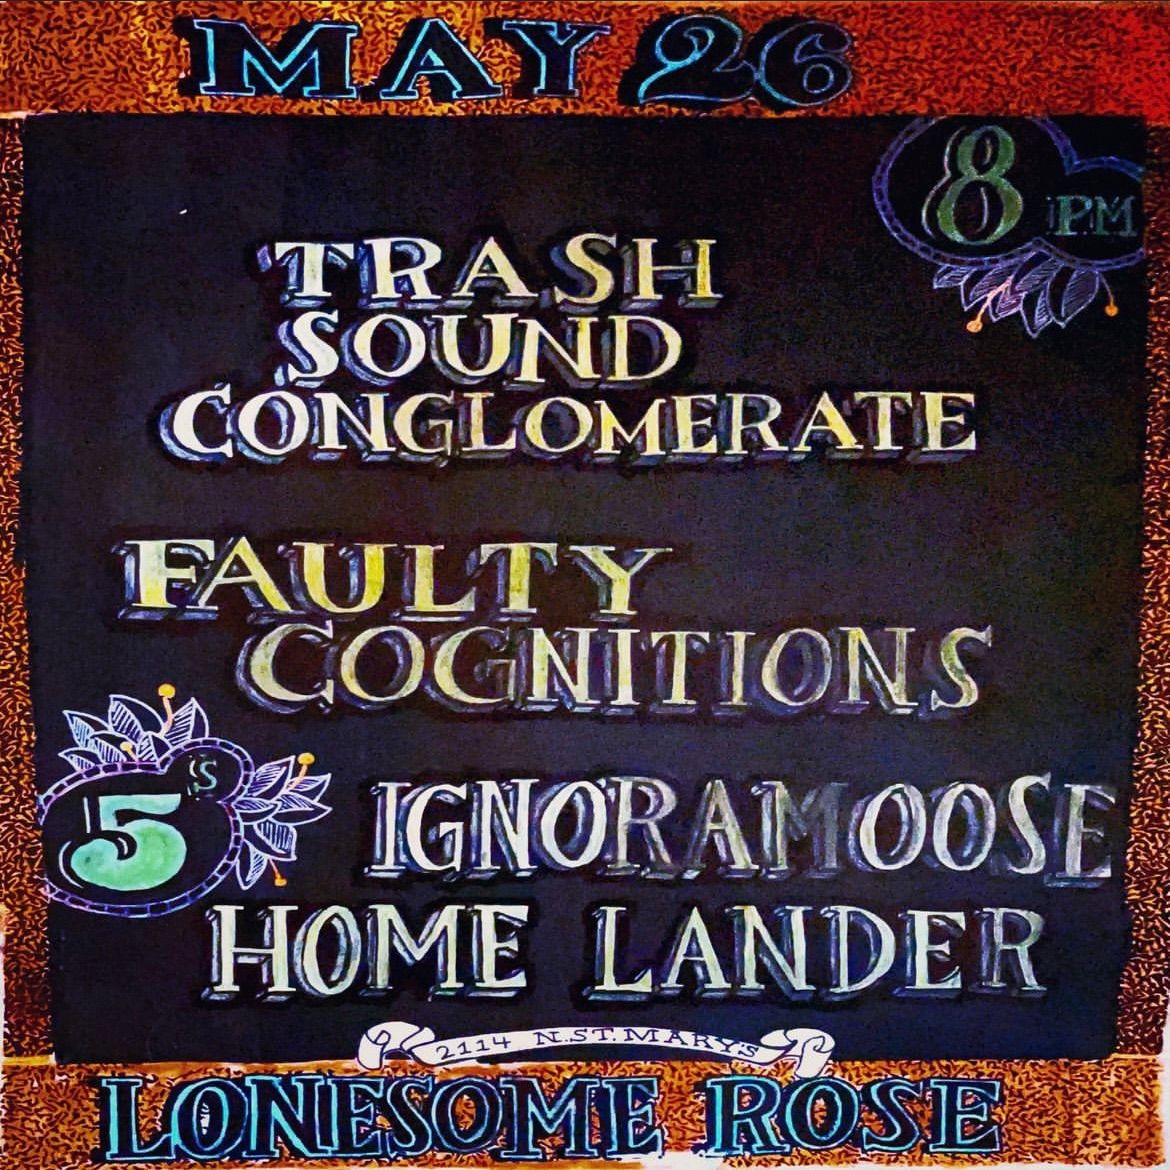 Trash Sound Conglomerate (Seattle), Faulty Cognitons, Ignoramoose, and Home Lander